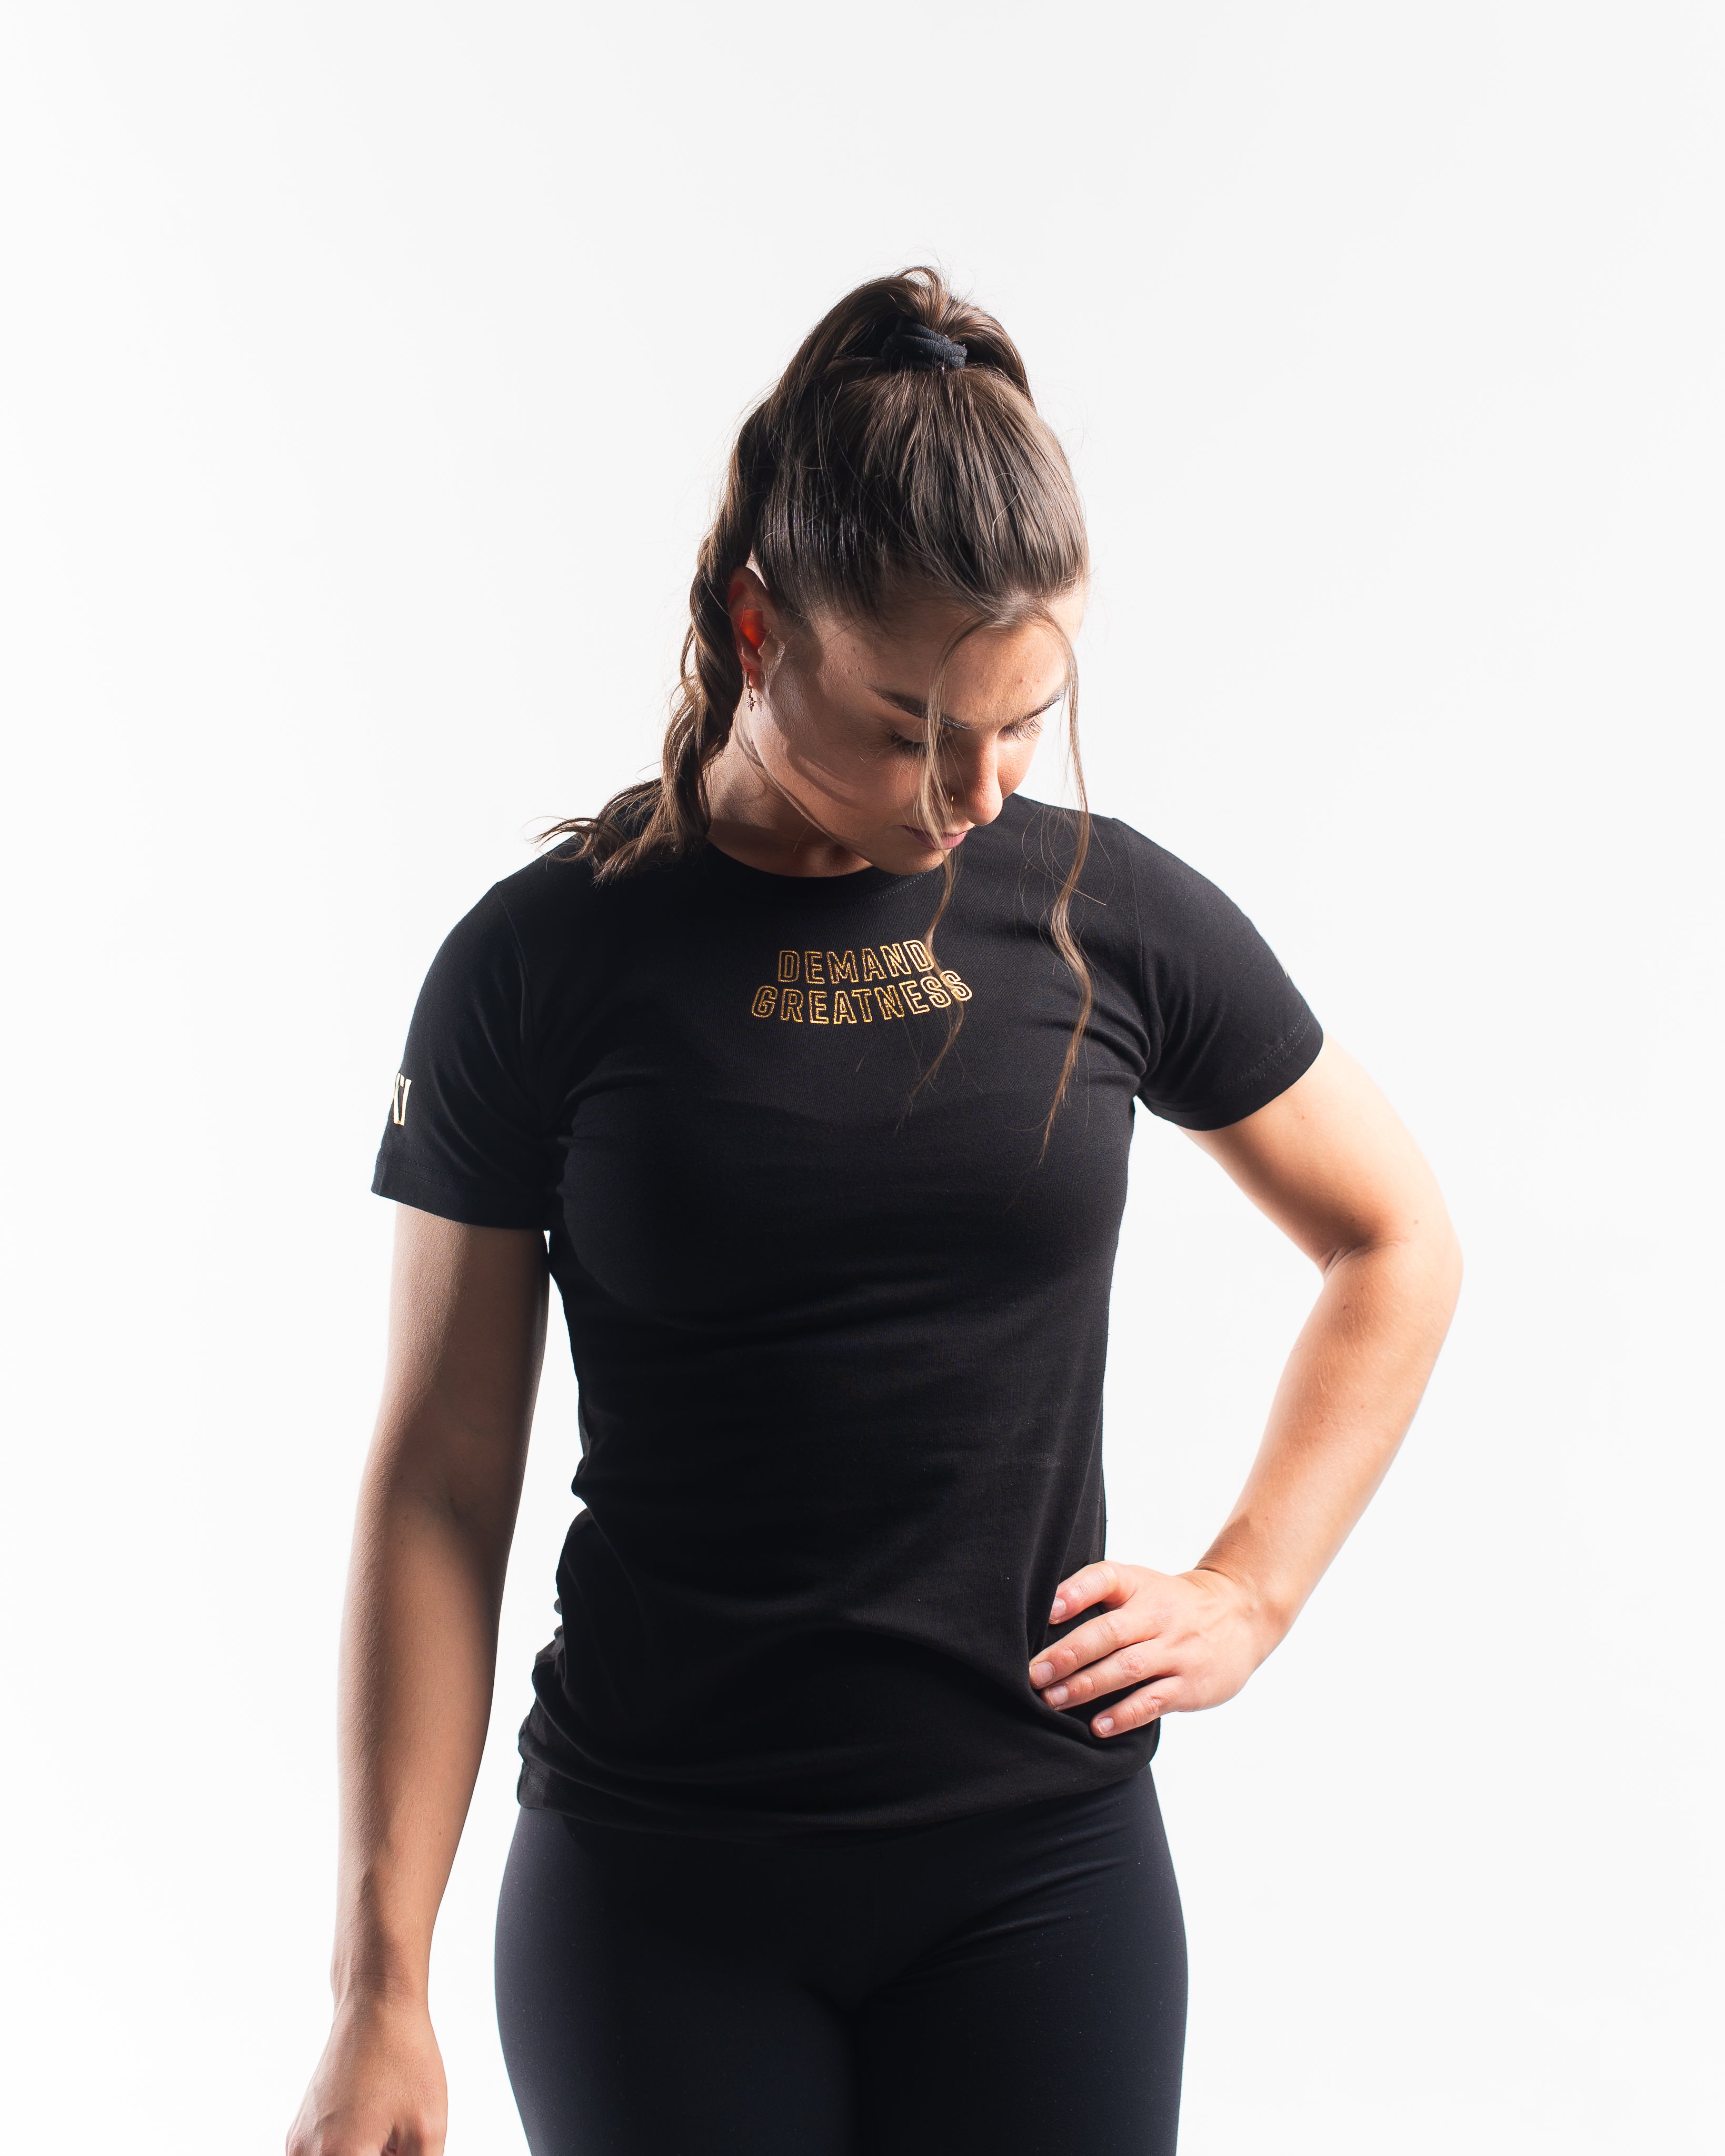 DG23 Gold Standard is our new meet shirt design highlighting Demand Greatness with a double outline font to showcase your impact on the platform. The DG23 Meet Shirt is IPF Approved. Shop the full A7 Powerlifting IPF Approved Equipment collection. The IPF Approved Kit includes Powerlifting Singlet, A7 Meet Shirt, A7 Zebra Wrist Wraps, A7 Deadlift Socks, Hourglass Knee Sleeves (Stiff Knee Sleeves and Rigor Mortis Knee Sleeves). All A7 Powerlifting Equipment shipping to UK, Norway, Switzerland and Iceland.